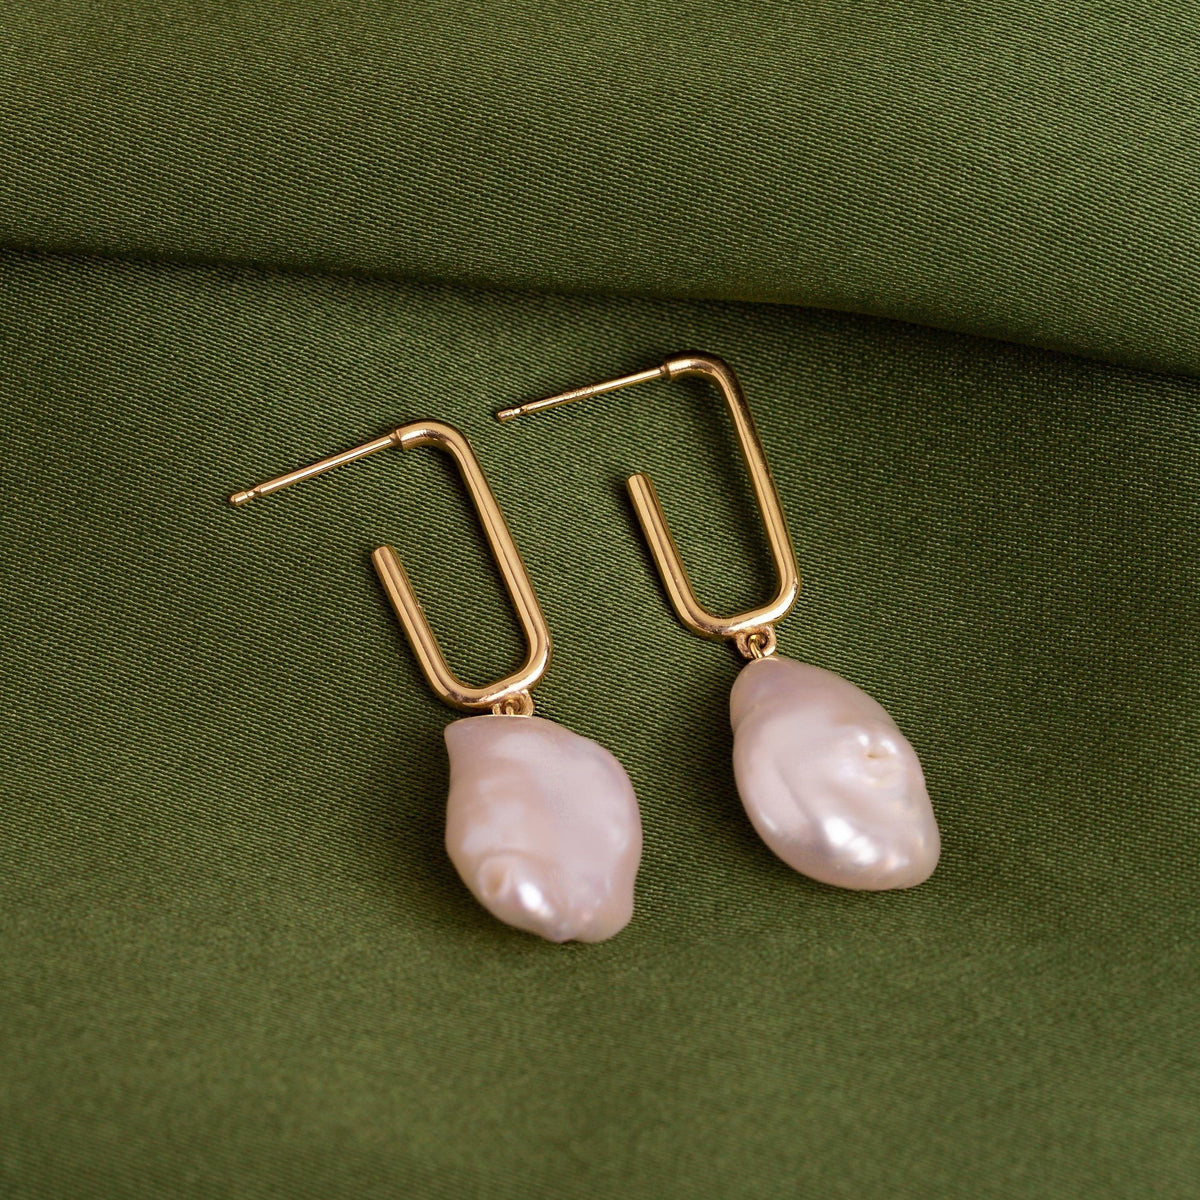 Upside Down Drop Studs Made of Solid Gold 14K Rose